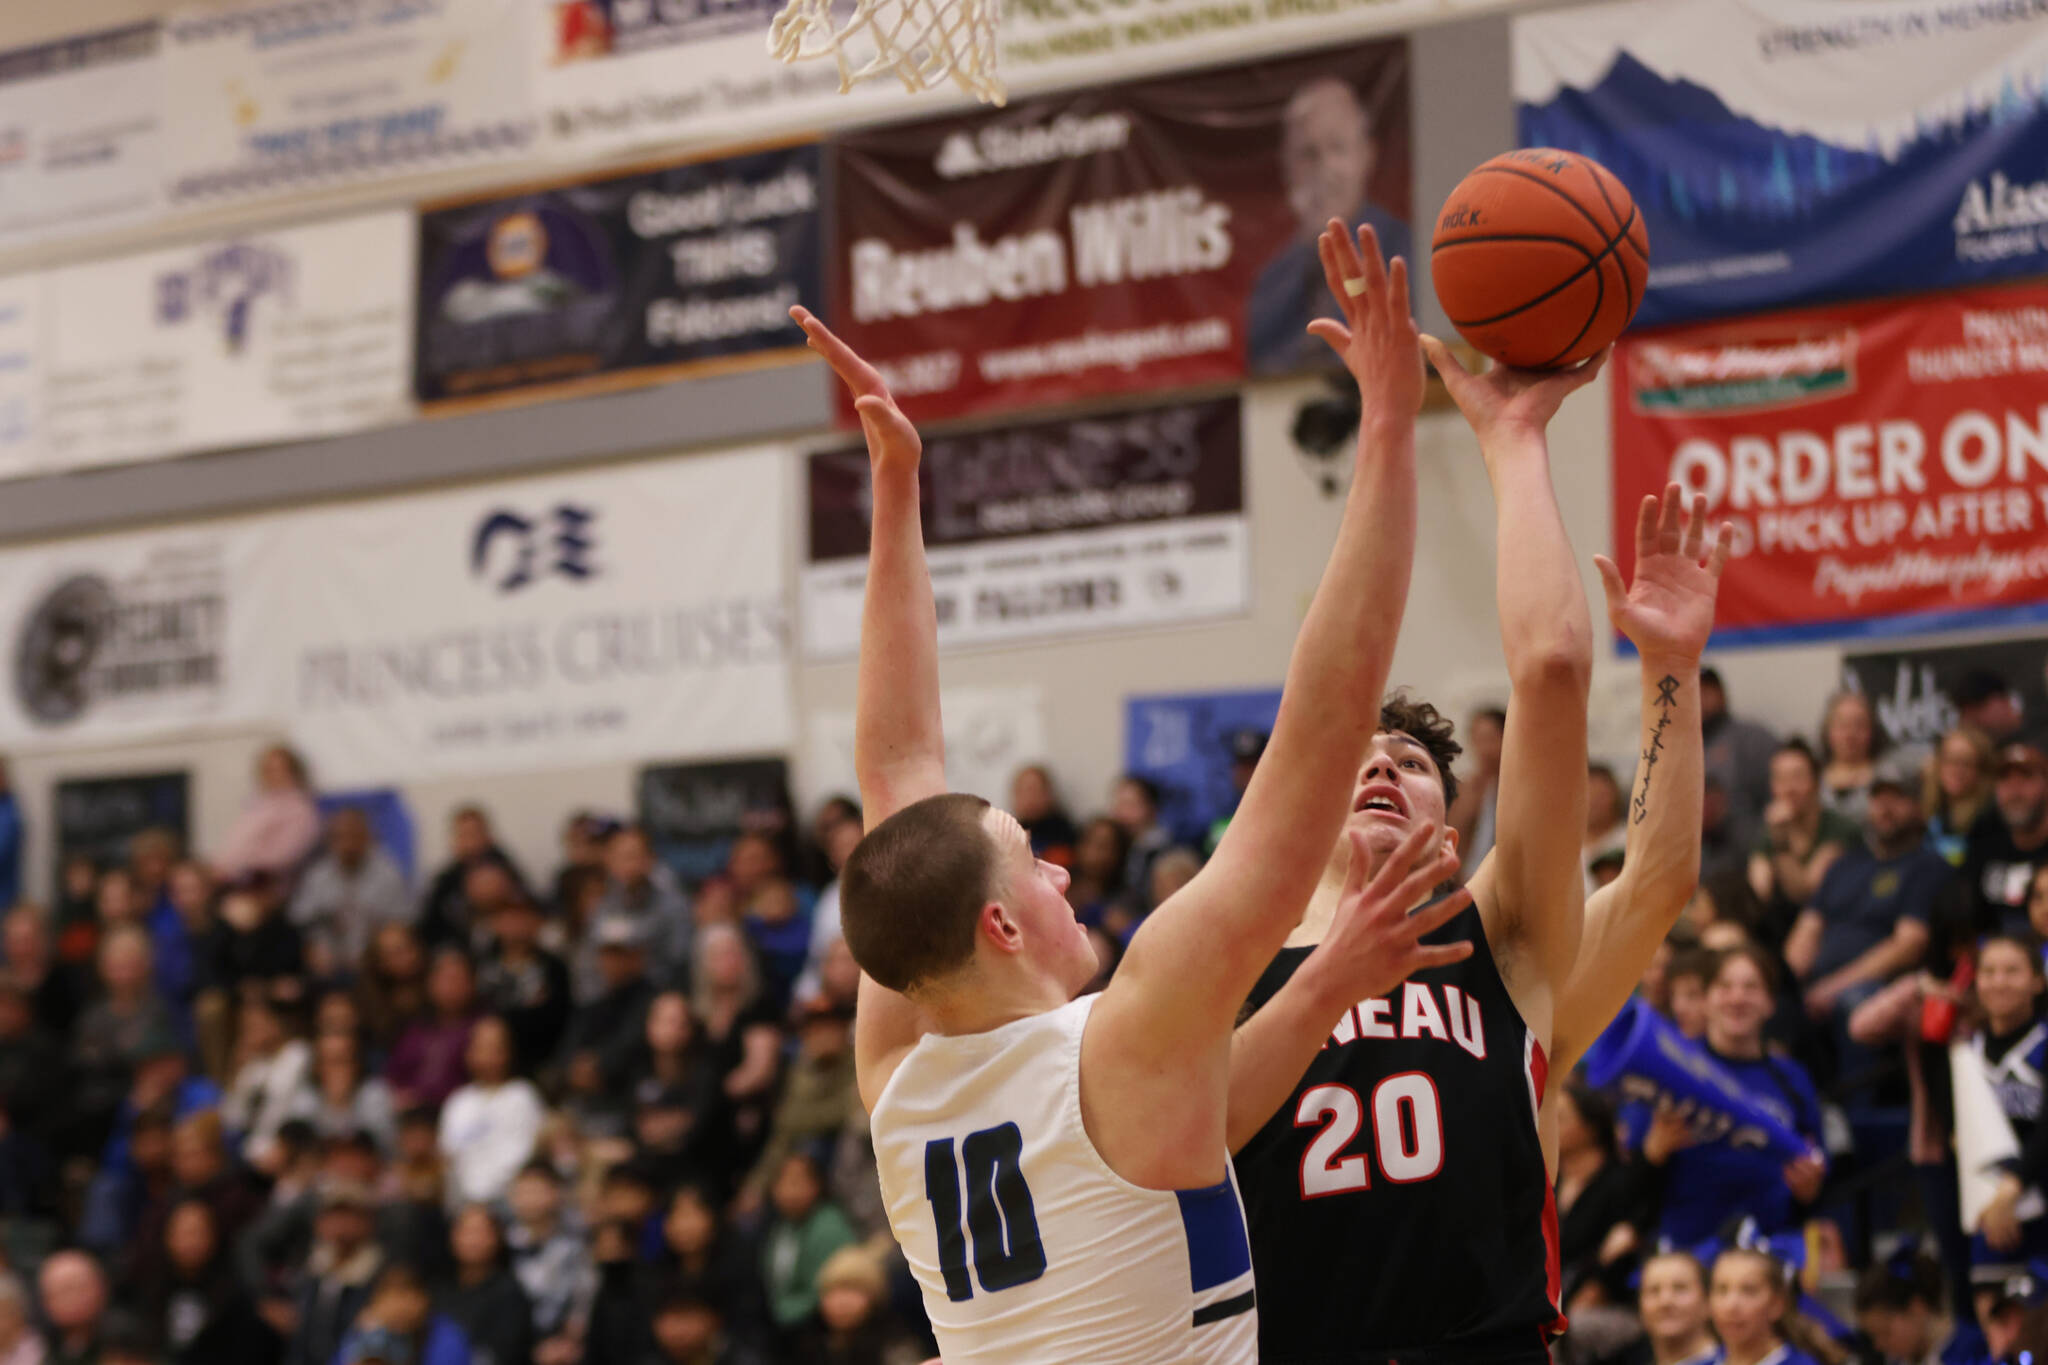 JDHS senior Orion Dybdahl (20) shoots over the outstretched arms of TMHS junior James Polasky early in a Crimson Bears comeback win at Thunder Mountain High School. (Ben Hohenstatt / Juneau Empire)